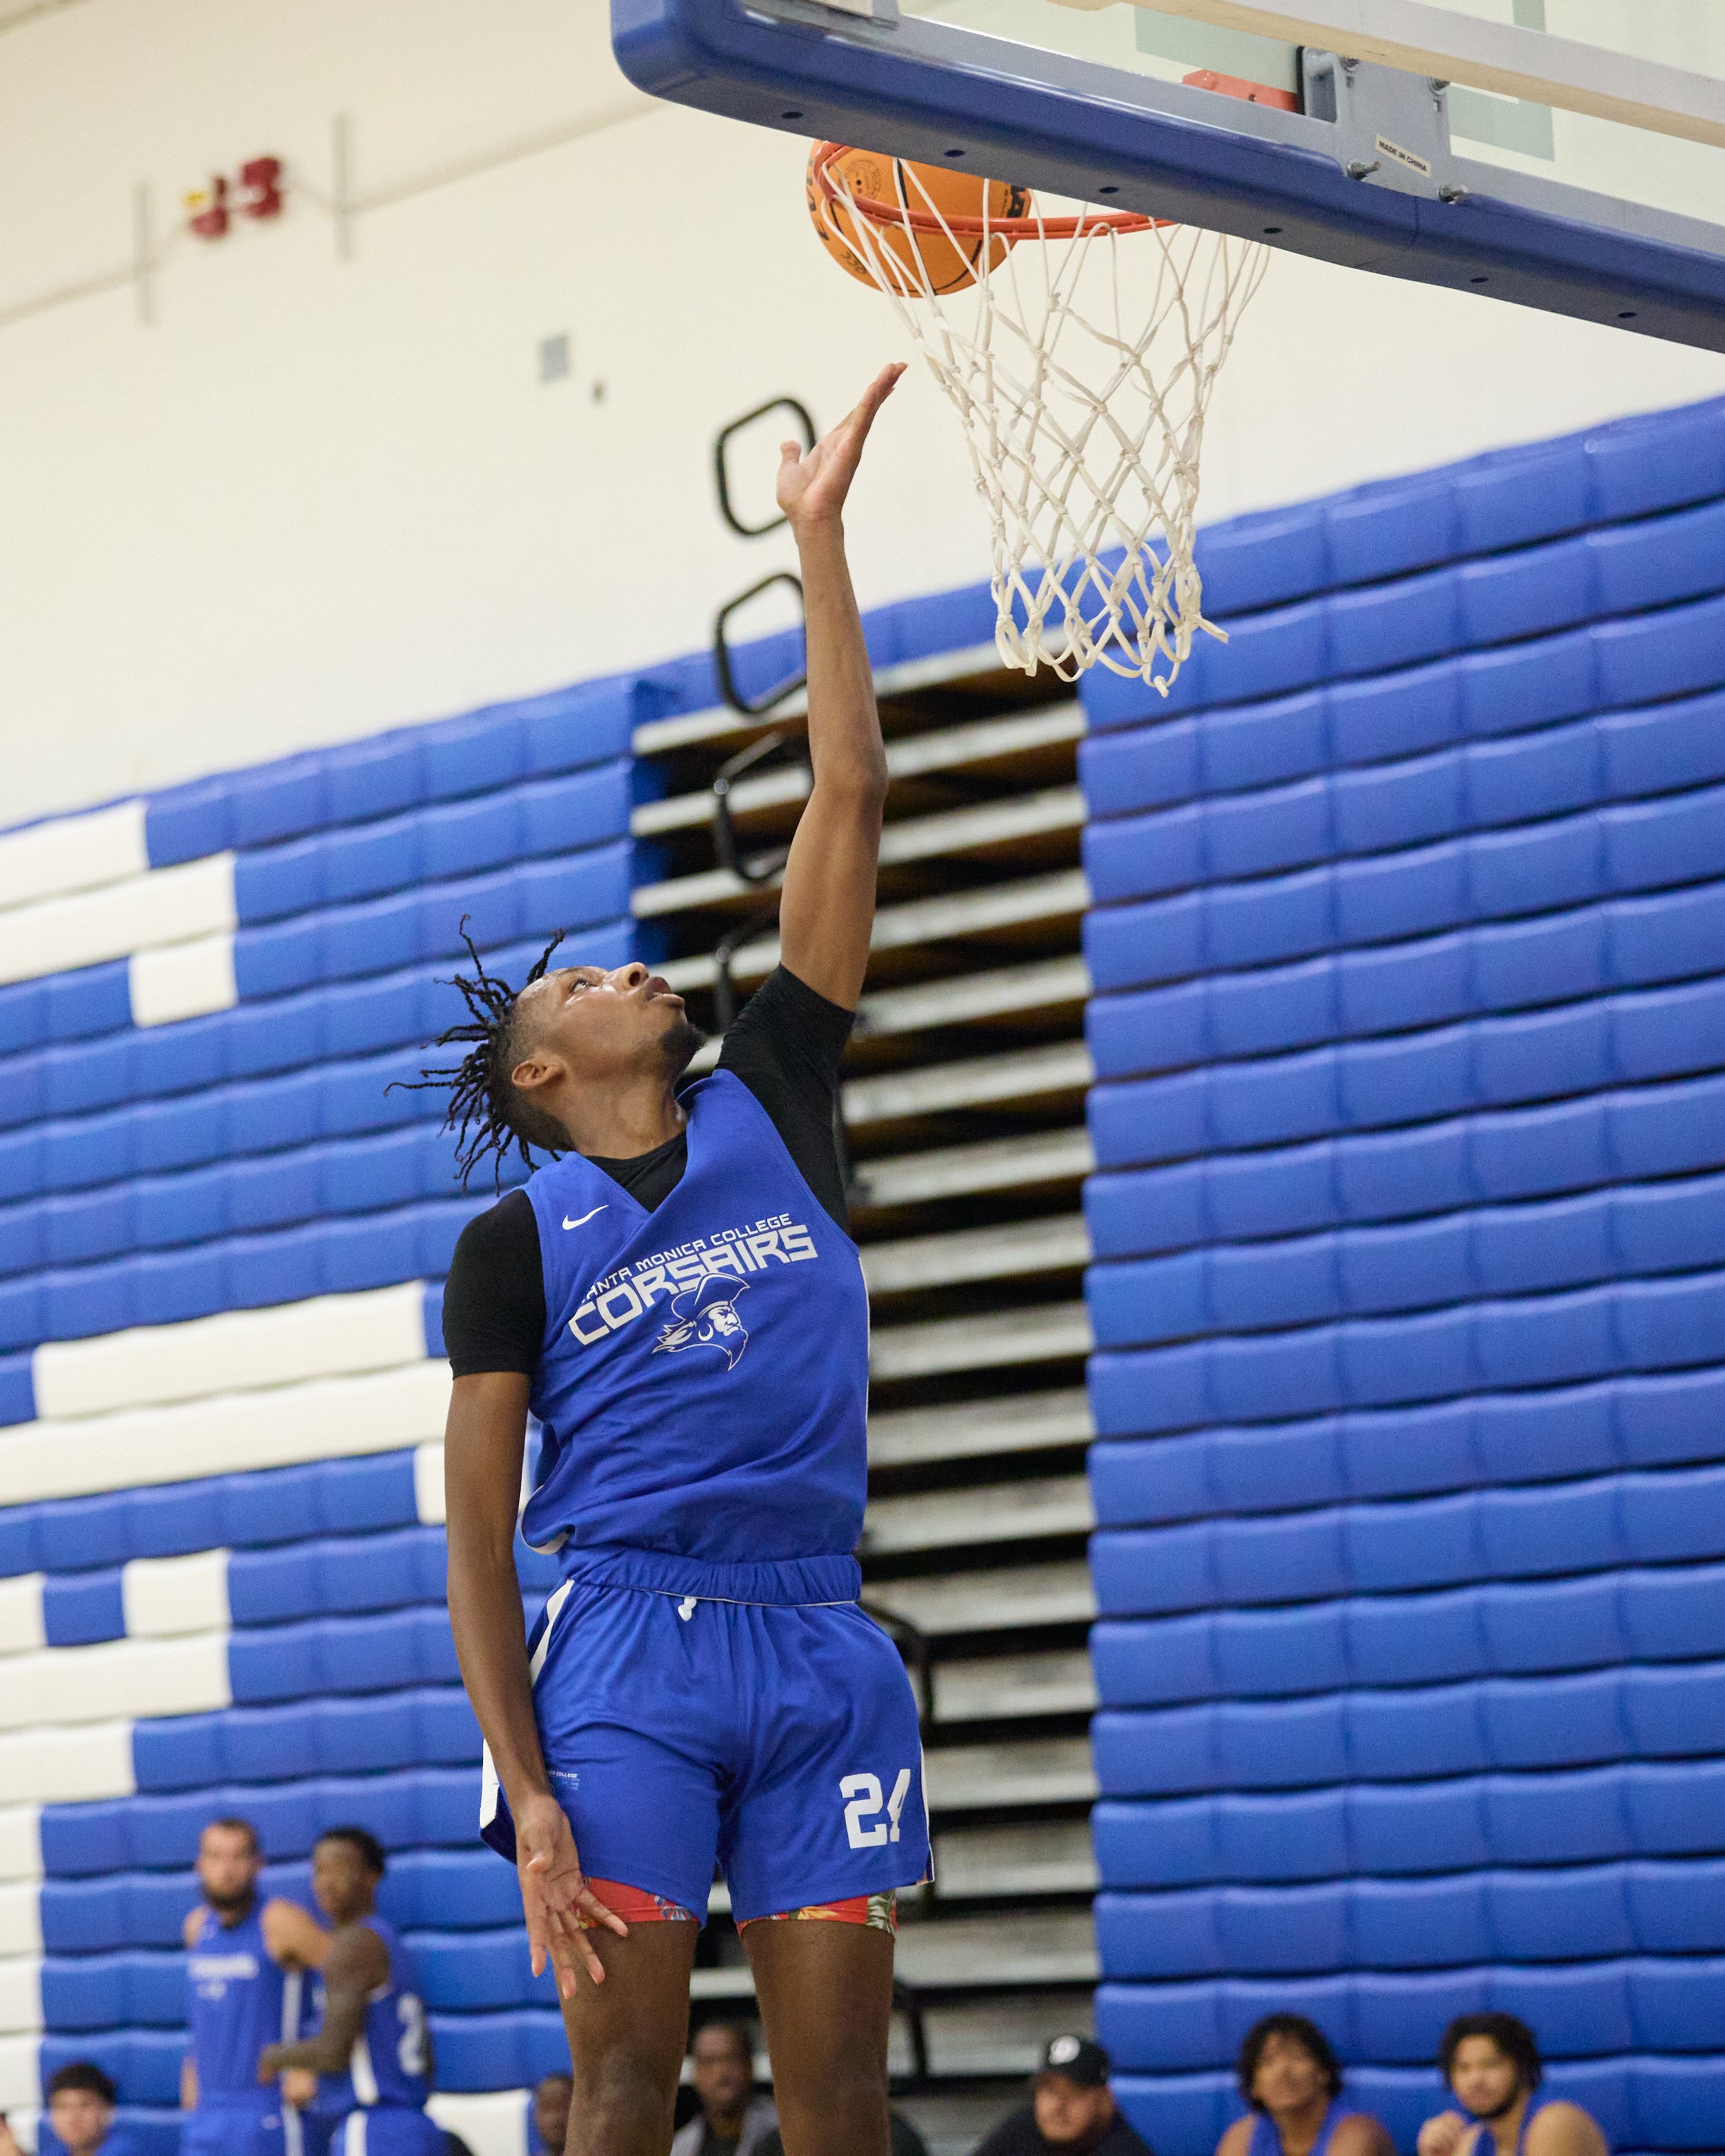  Santa Monica College Corsairs' Mike Hill scores a goal during the men's basketball match against the Orange Coast College Pirates at the SoCal Fall Juco Jamboree on Sundy, Spet 17, 2023, at Cerritos College in Norwalk, Calif. The Corsairs lost 70-76